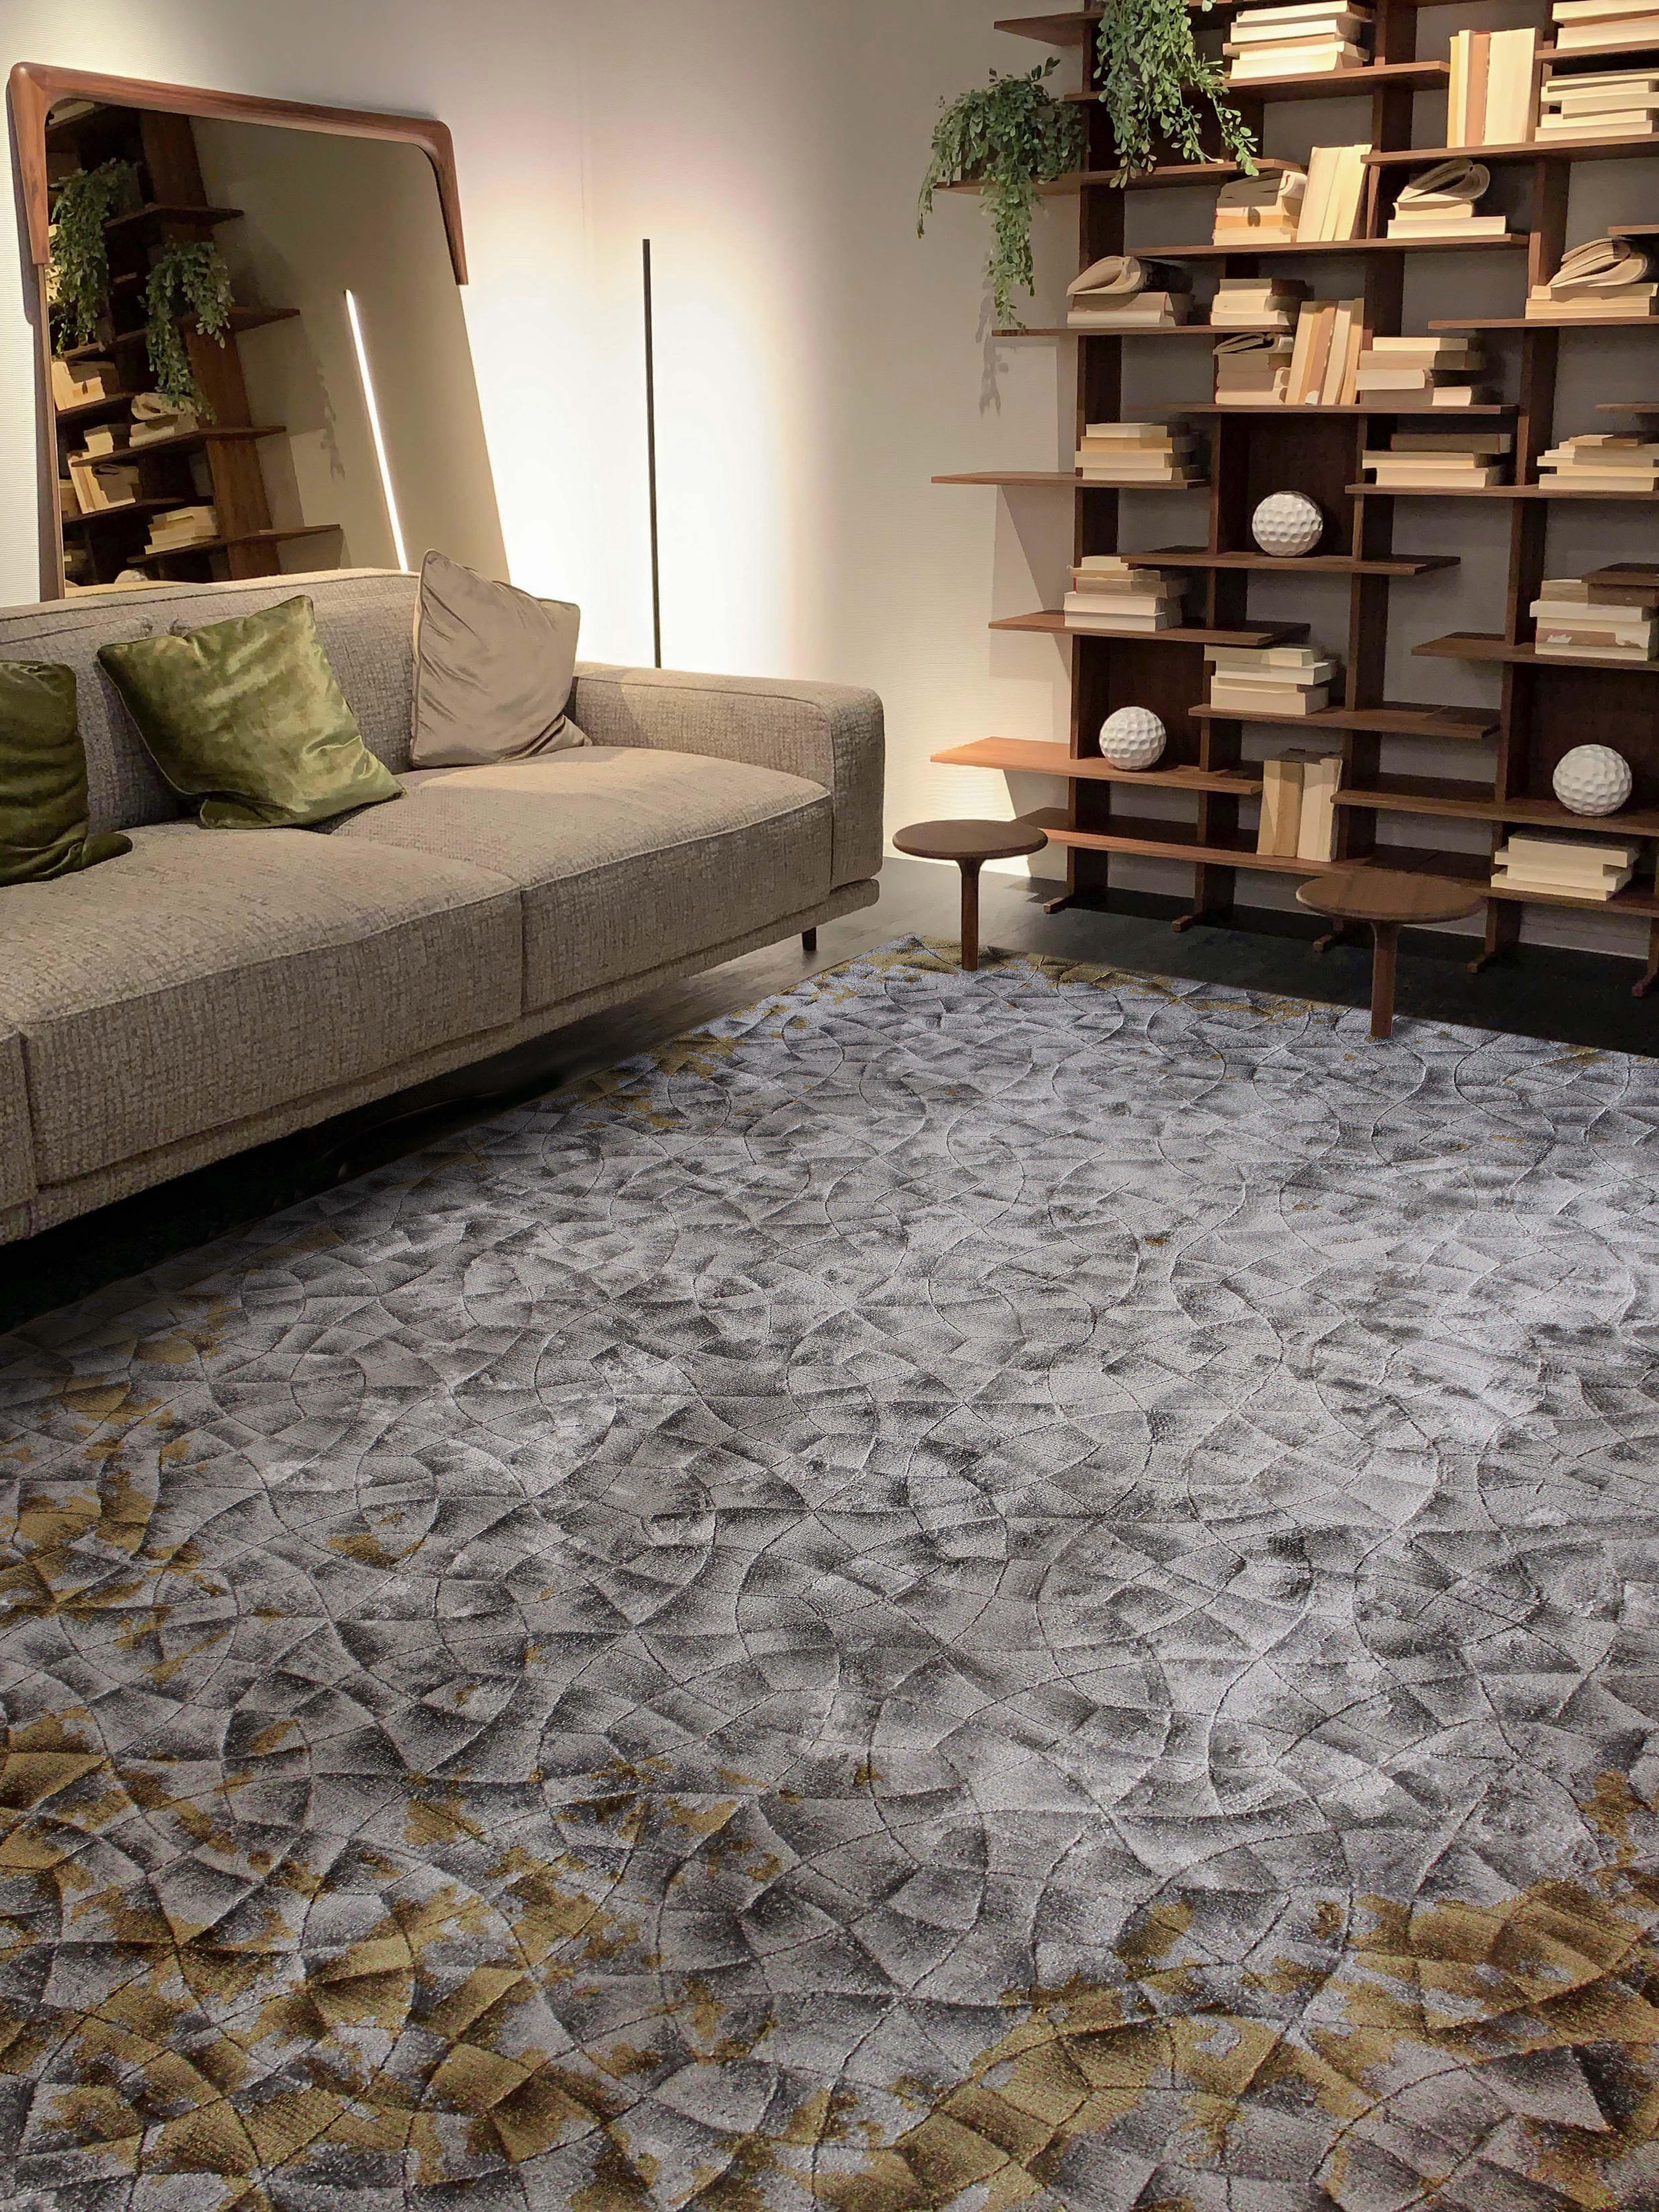 The ‘Lithology’ collection showcases stunning motifs that are evocative of the diverse and awe-inspiring natural surfaces of the earth. The carpets exhibit an artistic interpretation of Mother Nature in all its glory. The awe-inspiring range